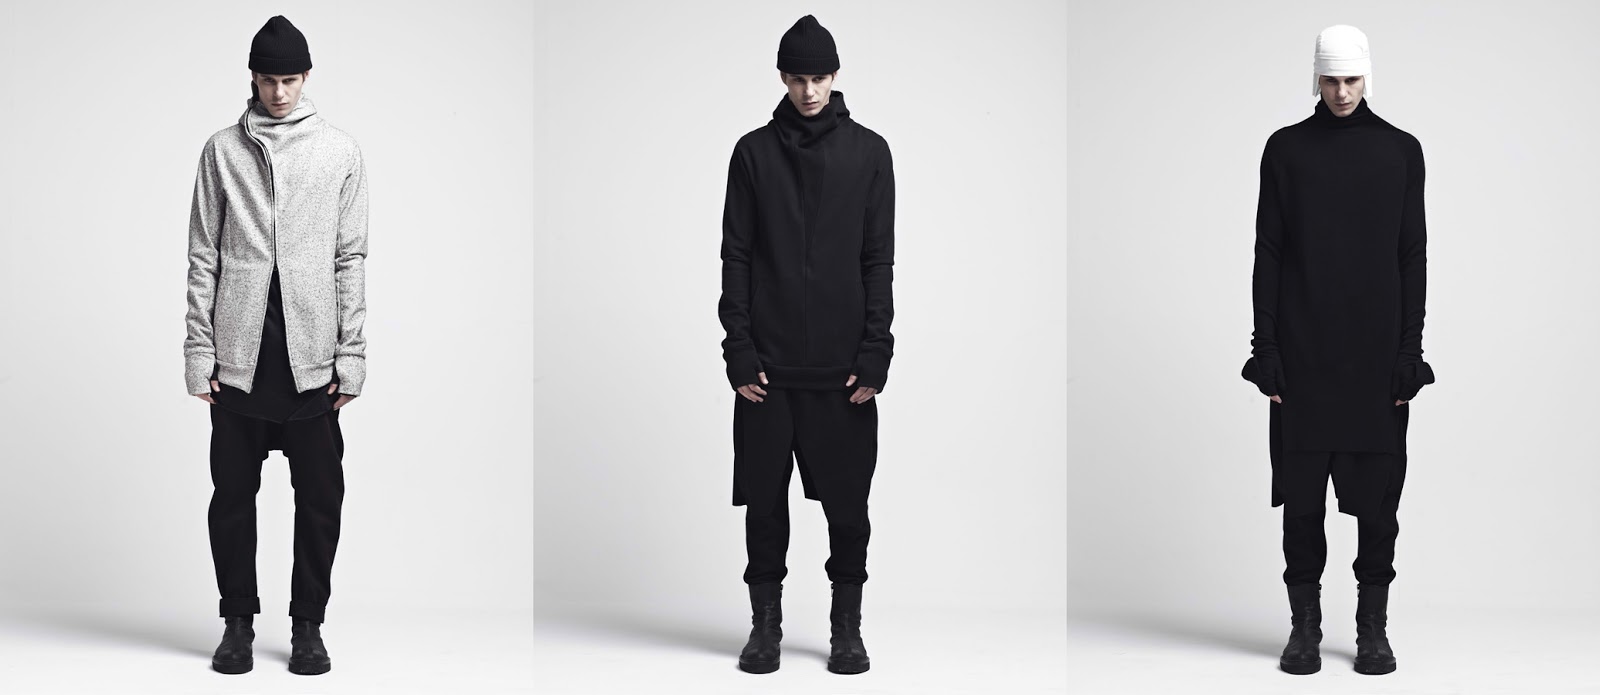 JOE CHIA - CHAPTER06 “Raised by wolves” F/W 2015 | In search of the ...